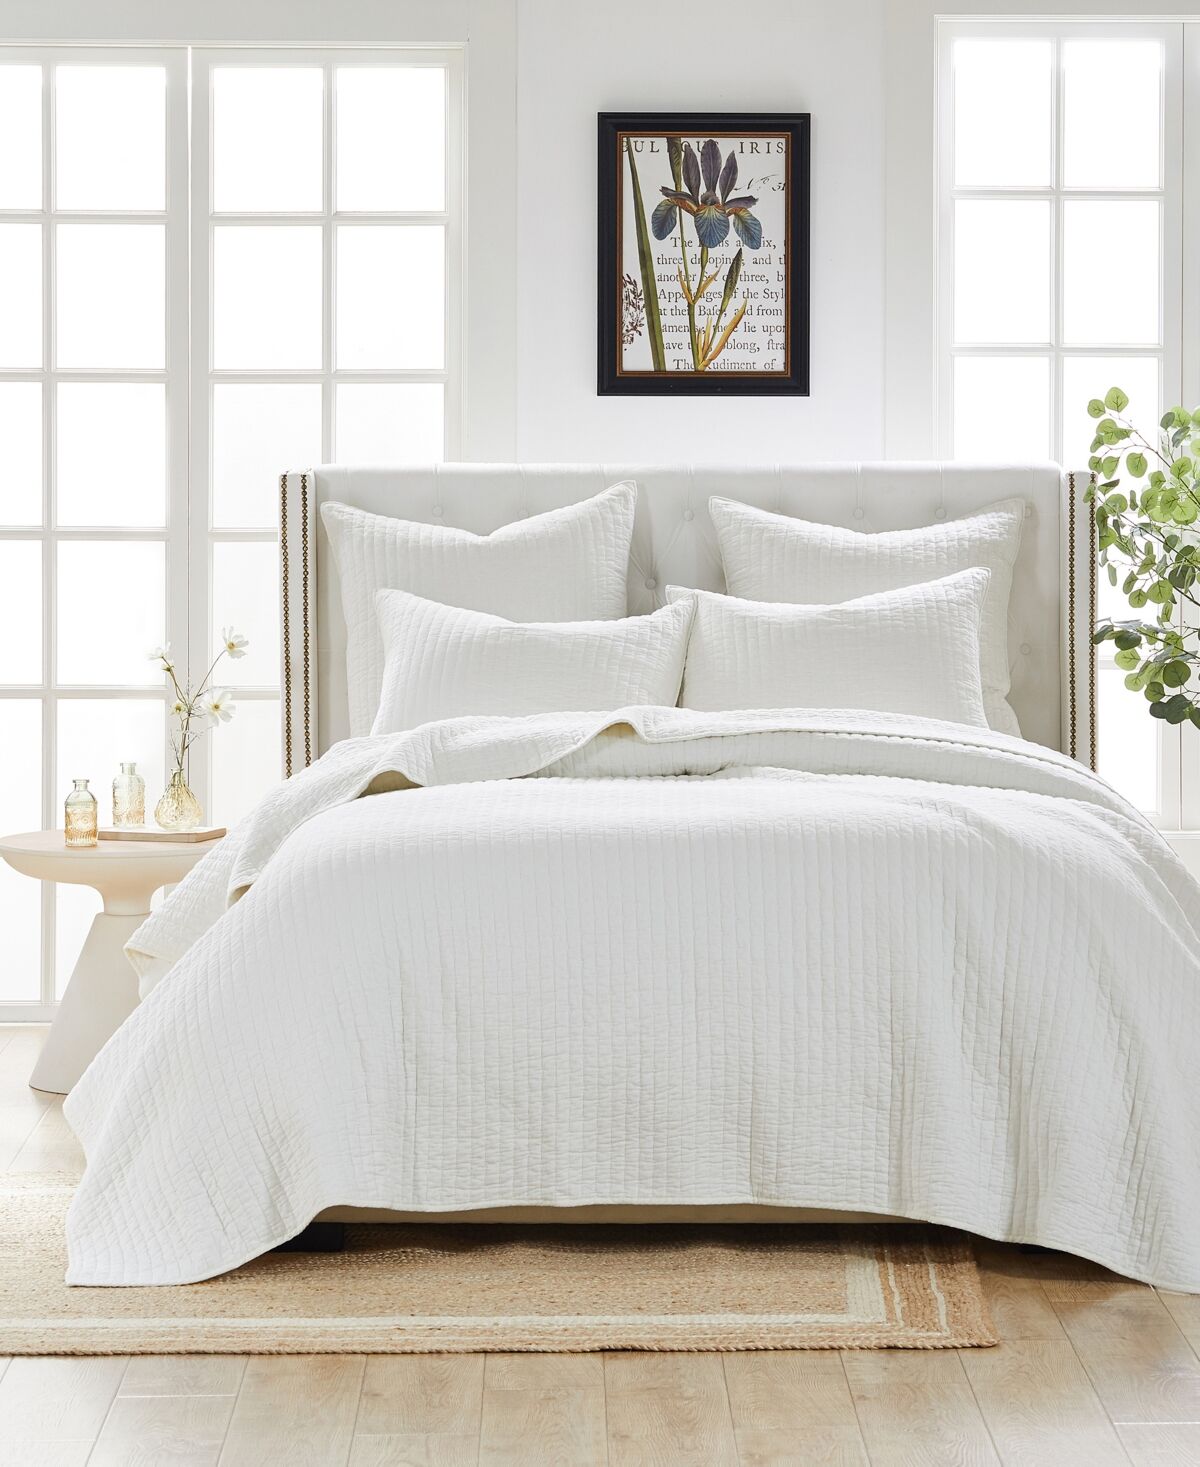 Greenland Home Fashions Monterrey Finely-Stitched Cotton 3 Piece Quilt Set, Full/Queen - Off-White